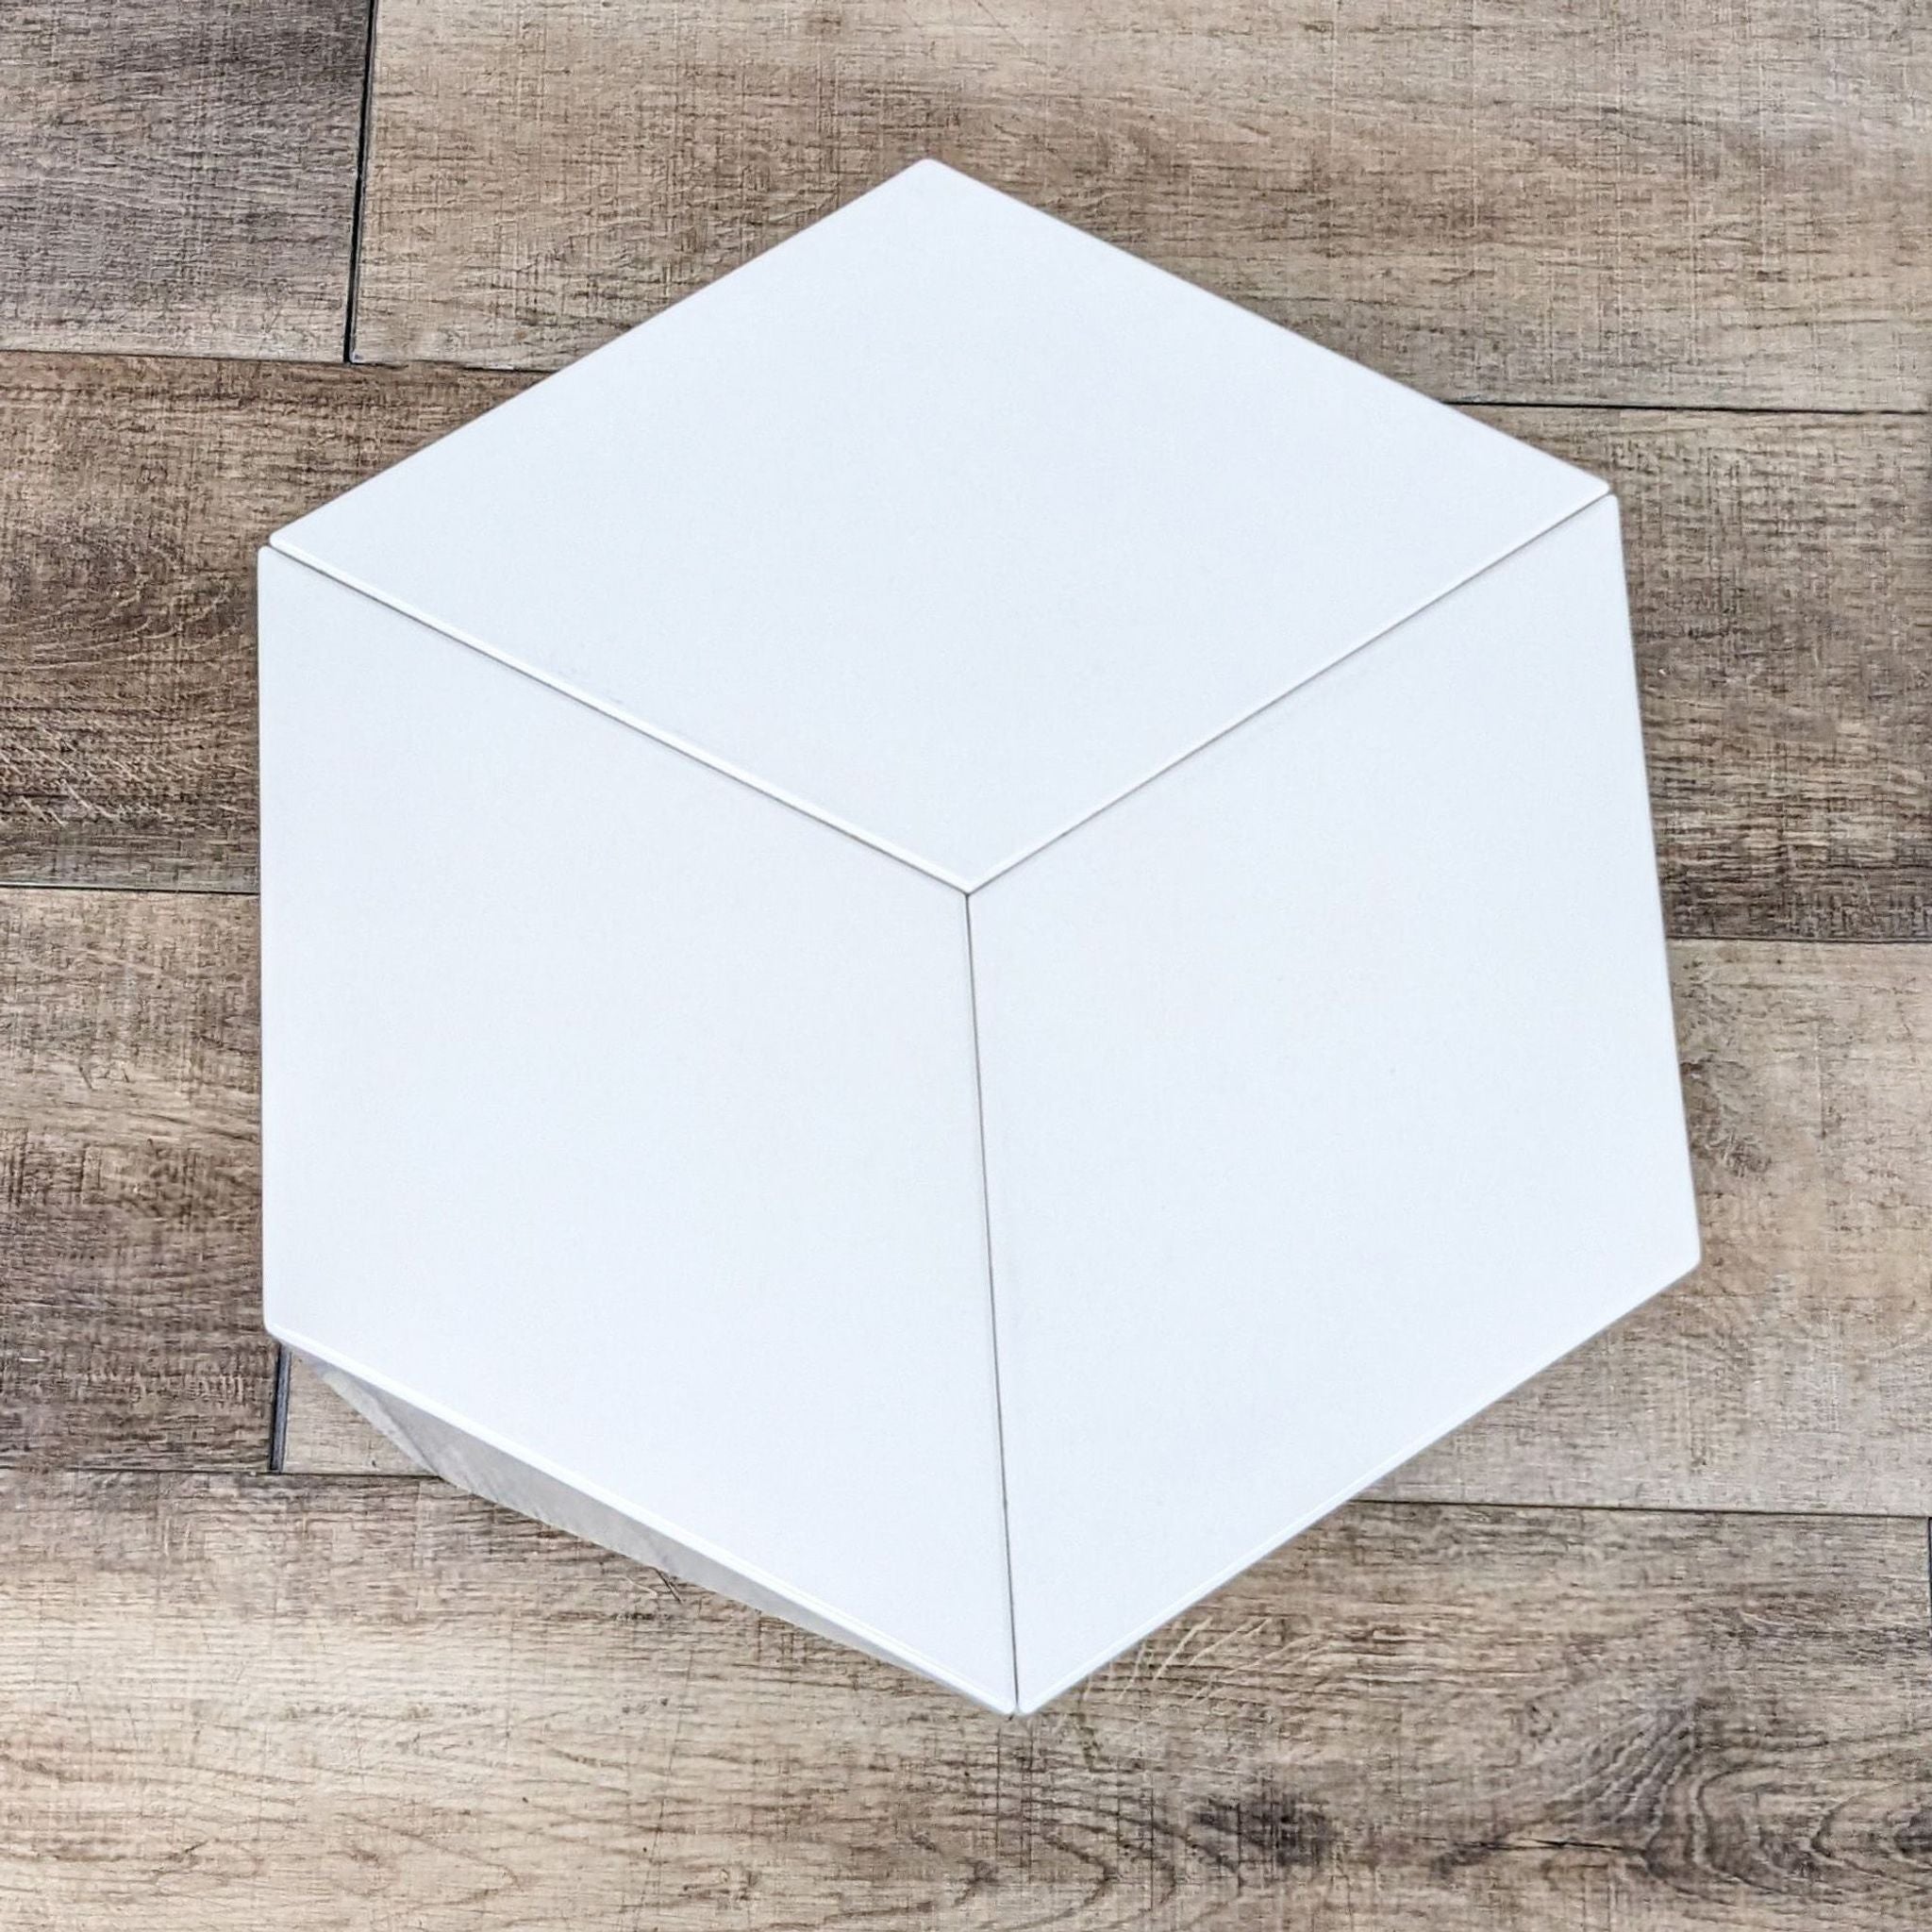 Top-down view of Vitra Prismatic Side table showcasing its hexagonal shape and aluminum material.